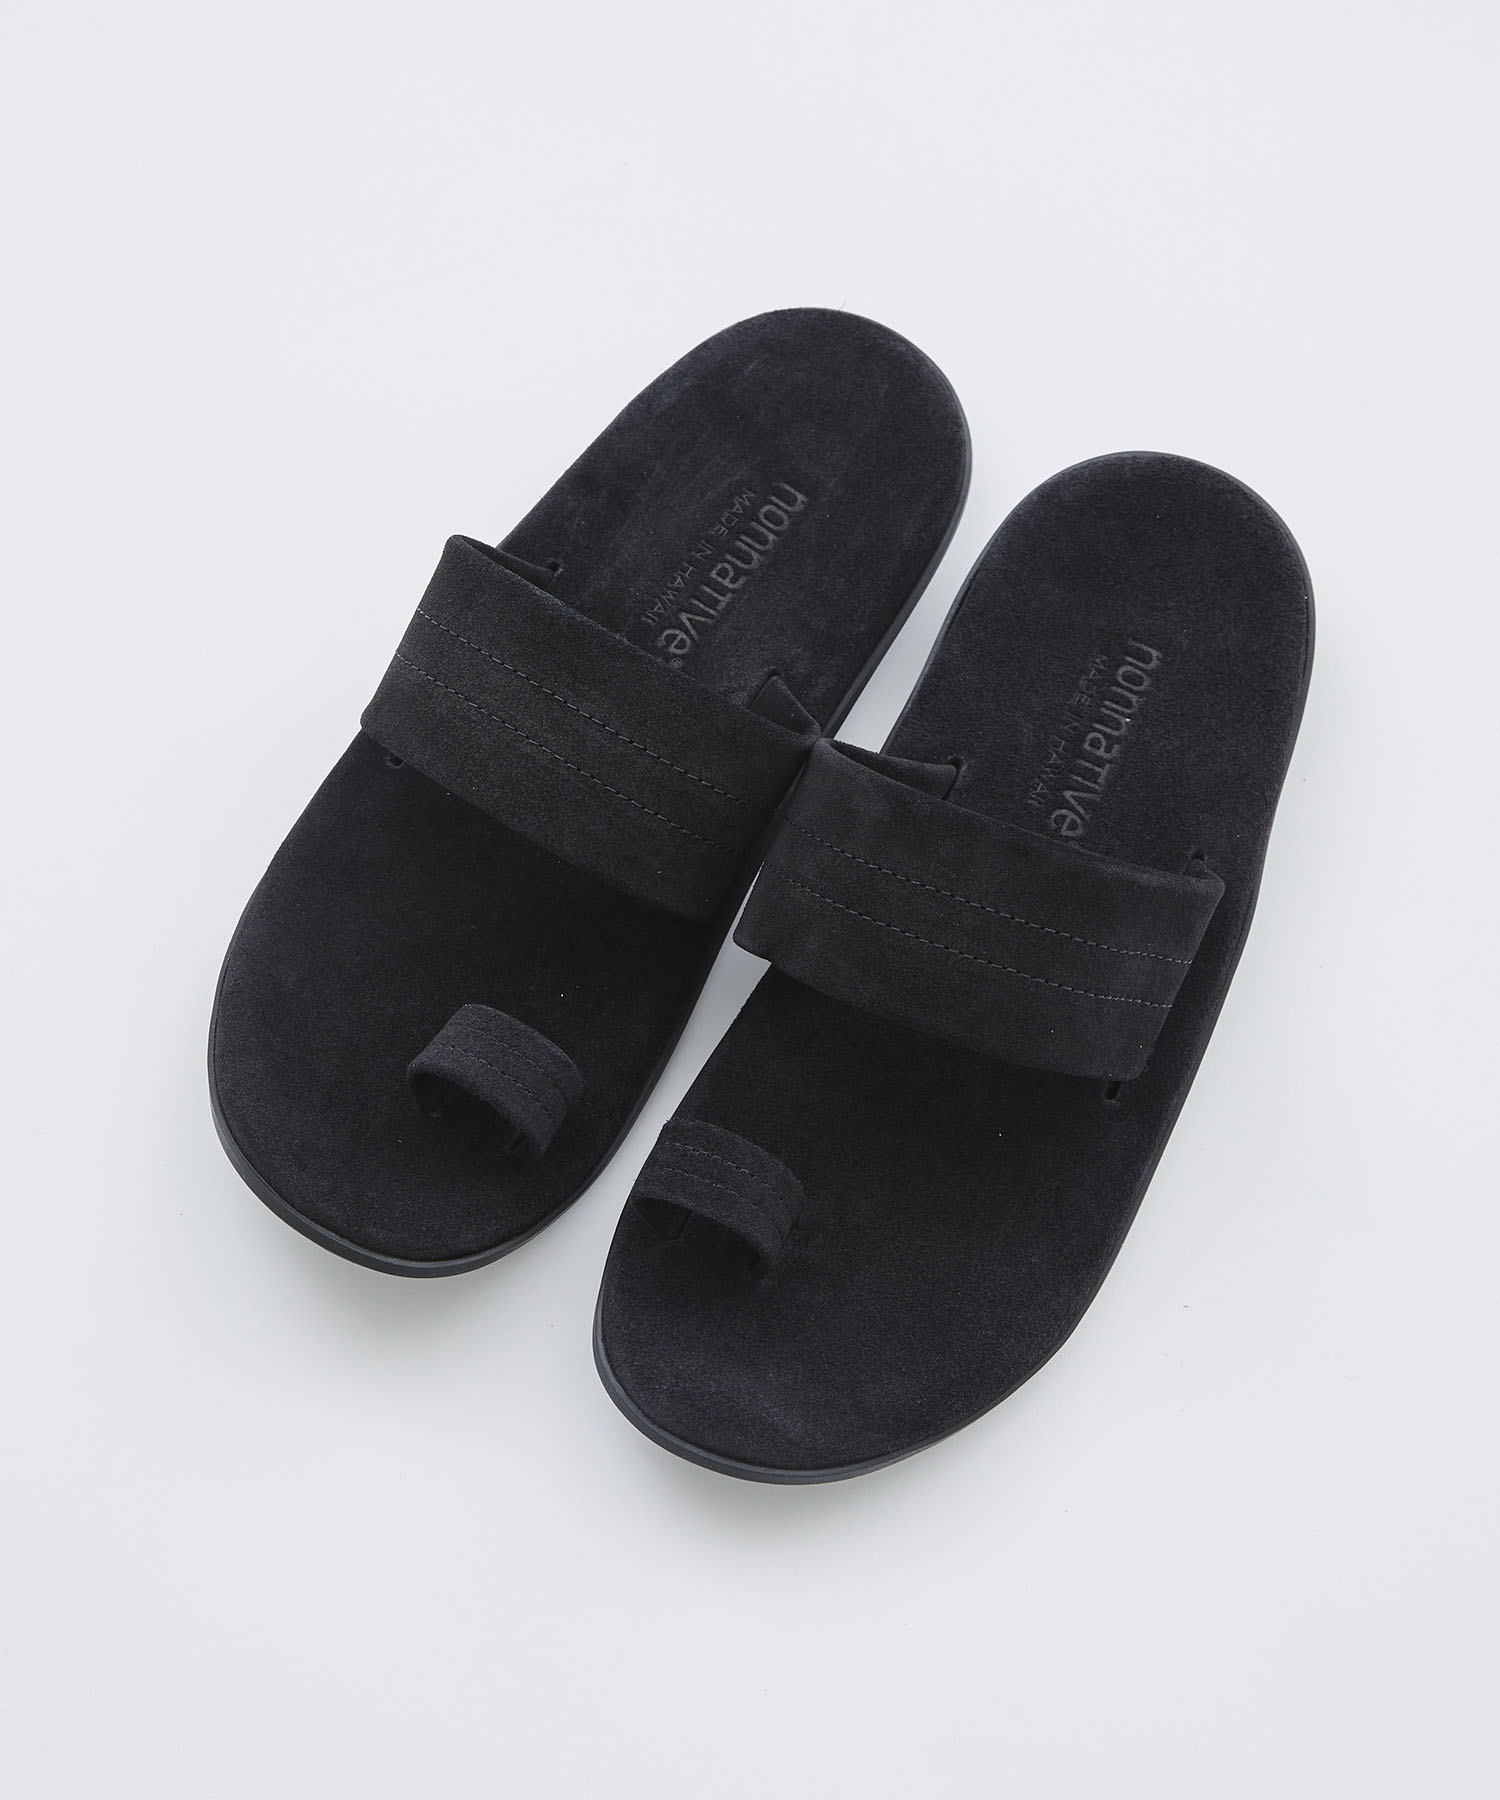 RANCHER SANDAL COW LEATHER BY ISLAND SLIPPER nonnative